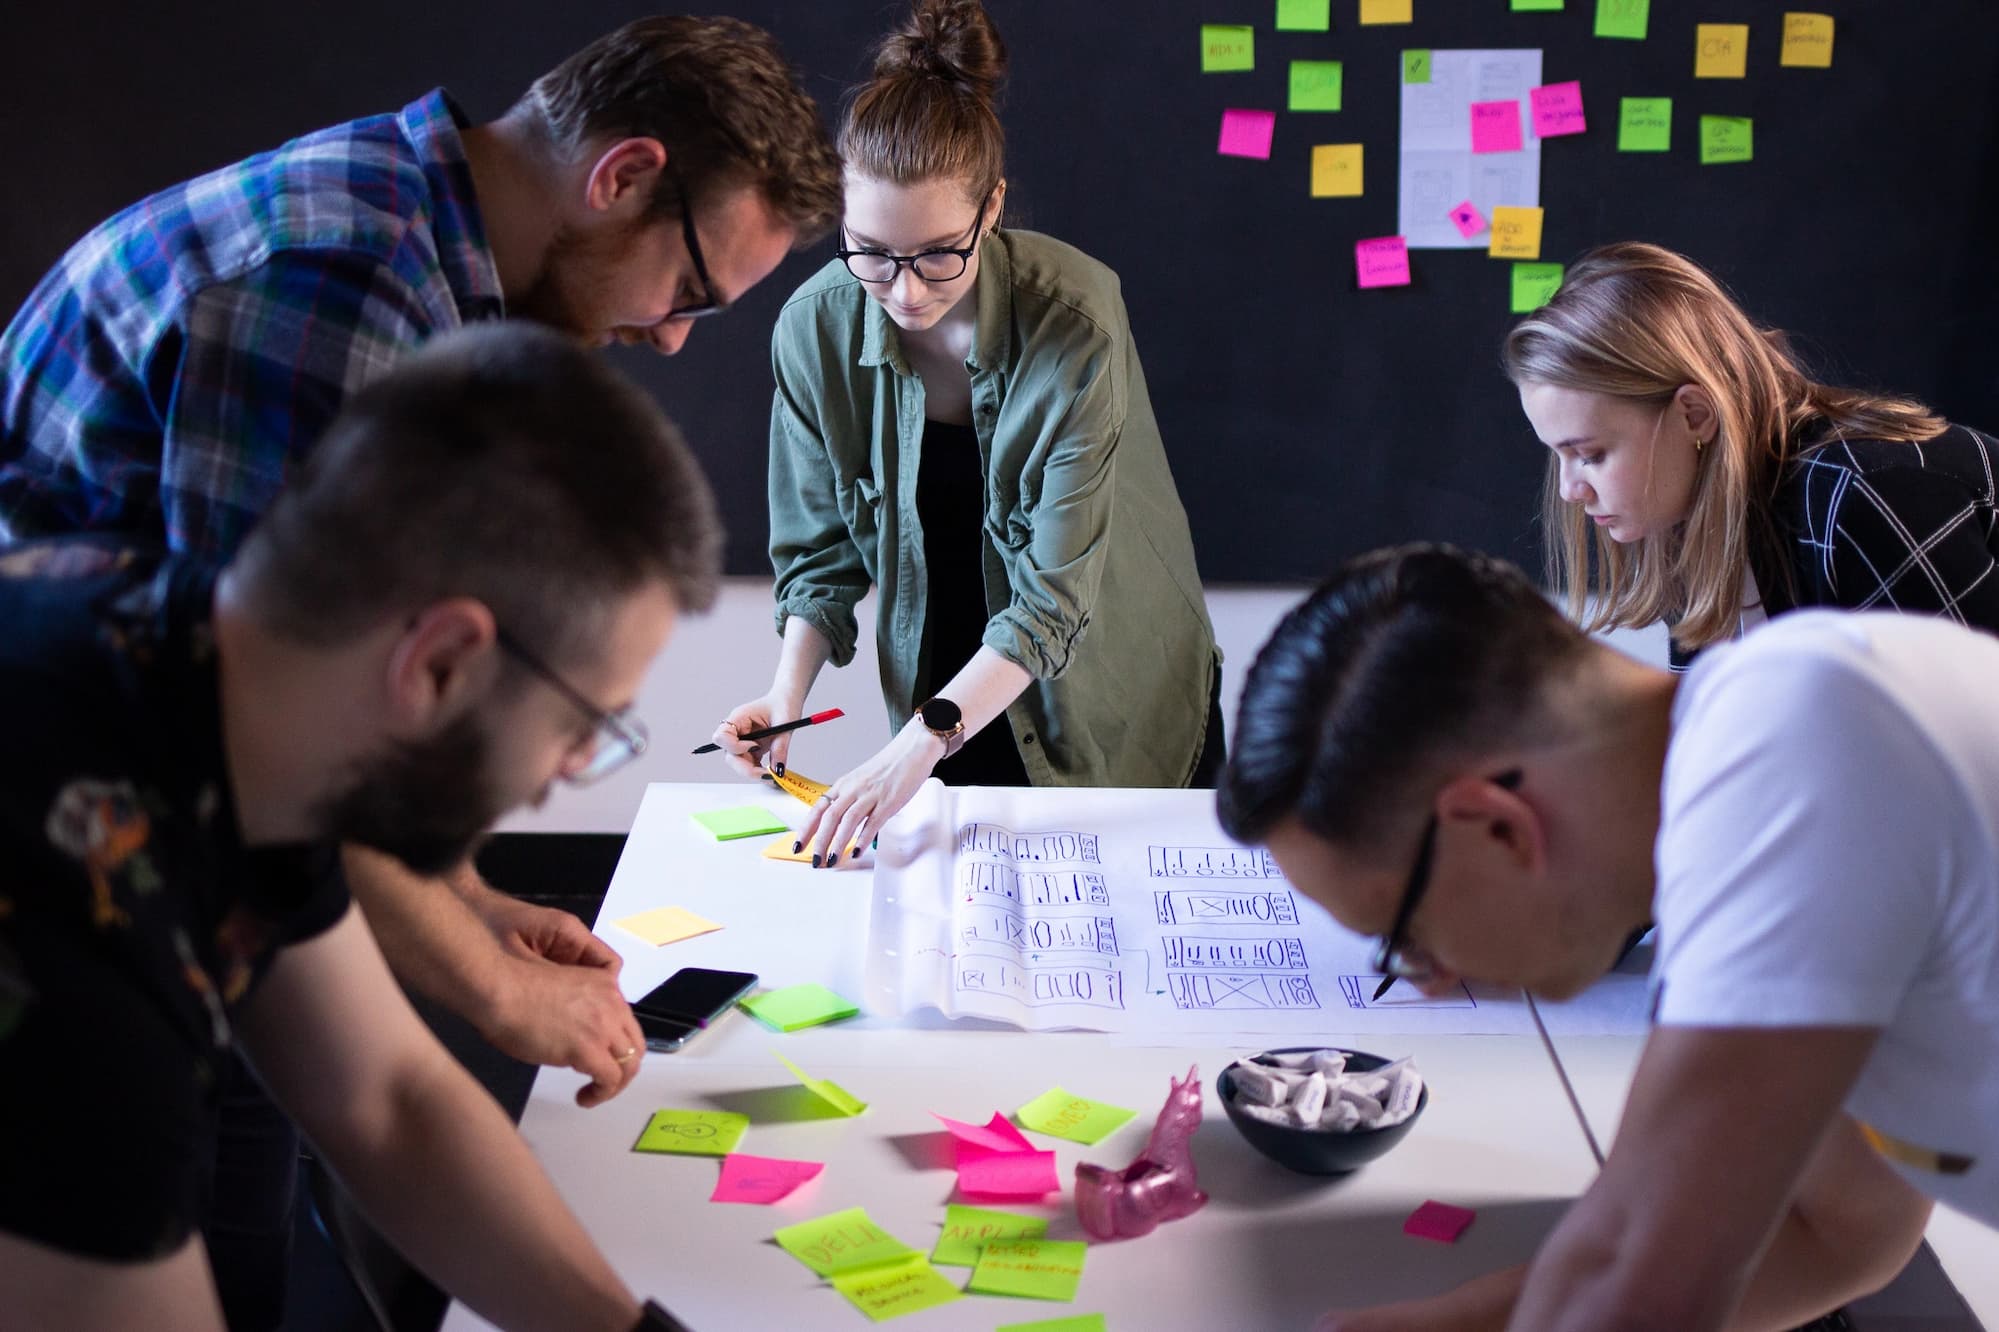 Design workshops – five people standing over a table, with many sticky notes around and one woman drawing a user interface on a big sheet of paper